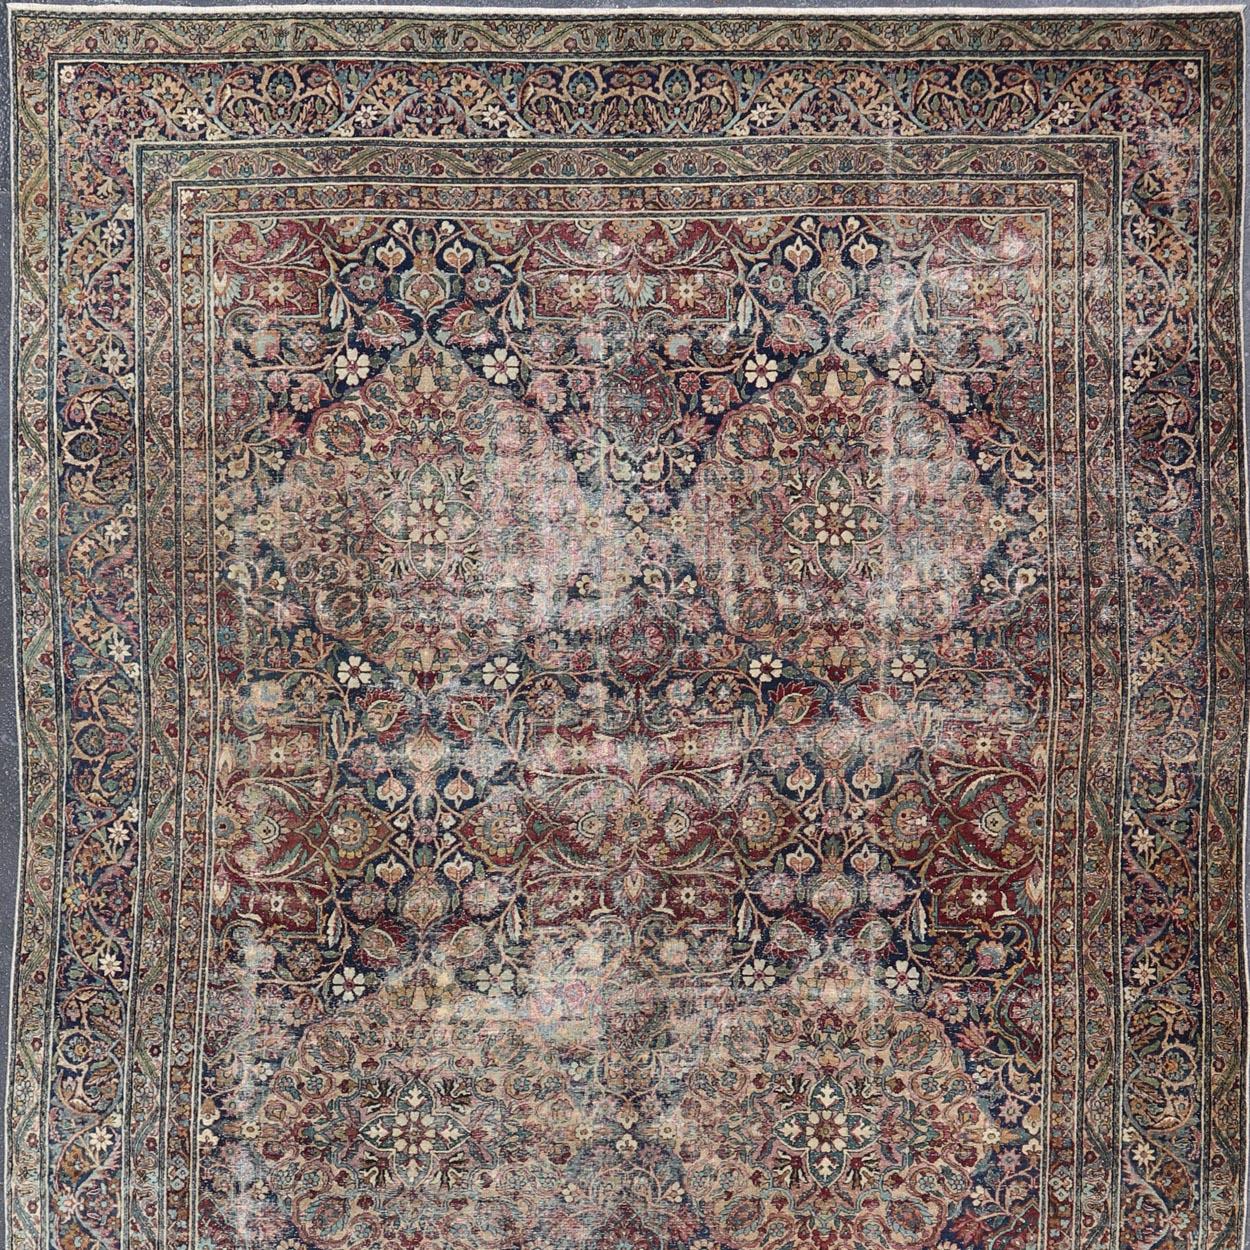 Antique Persian Lavar Kerman Large Gallery Rug with All-Over Floral Design For Sale 5